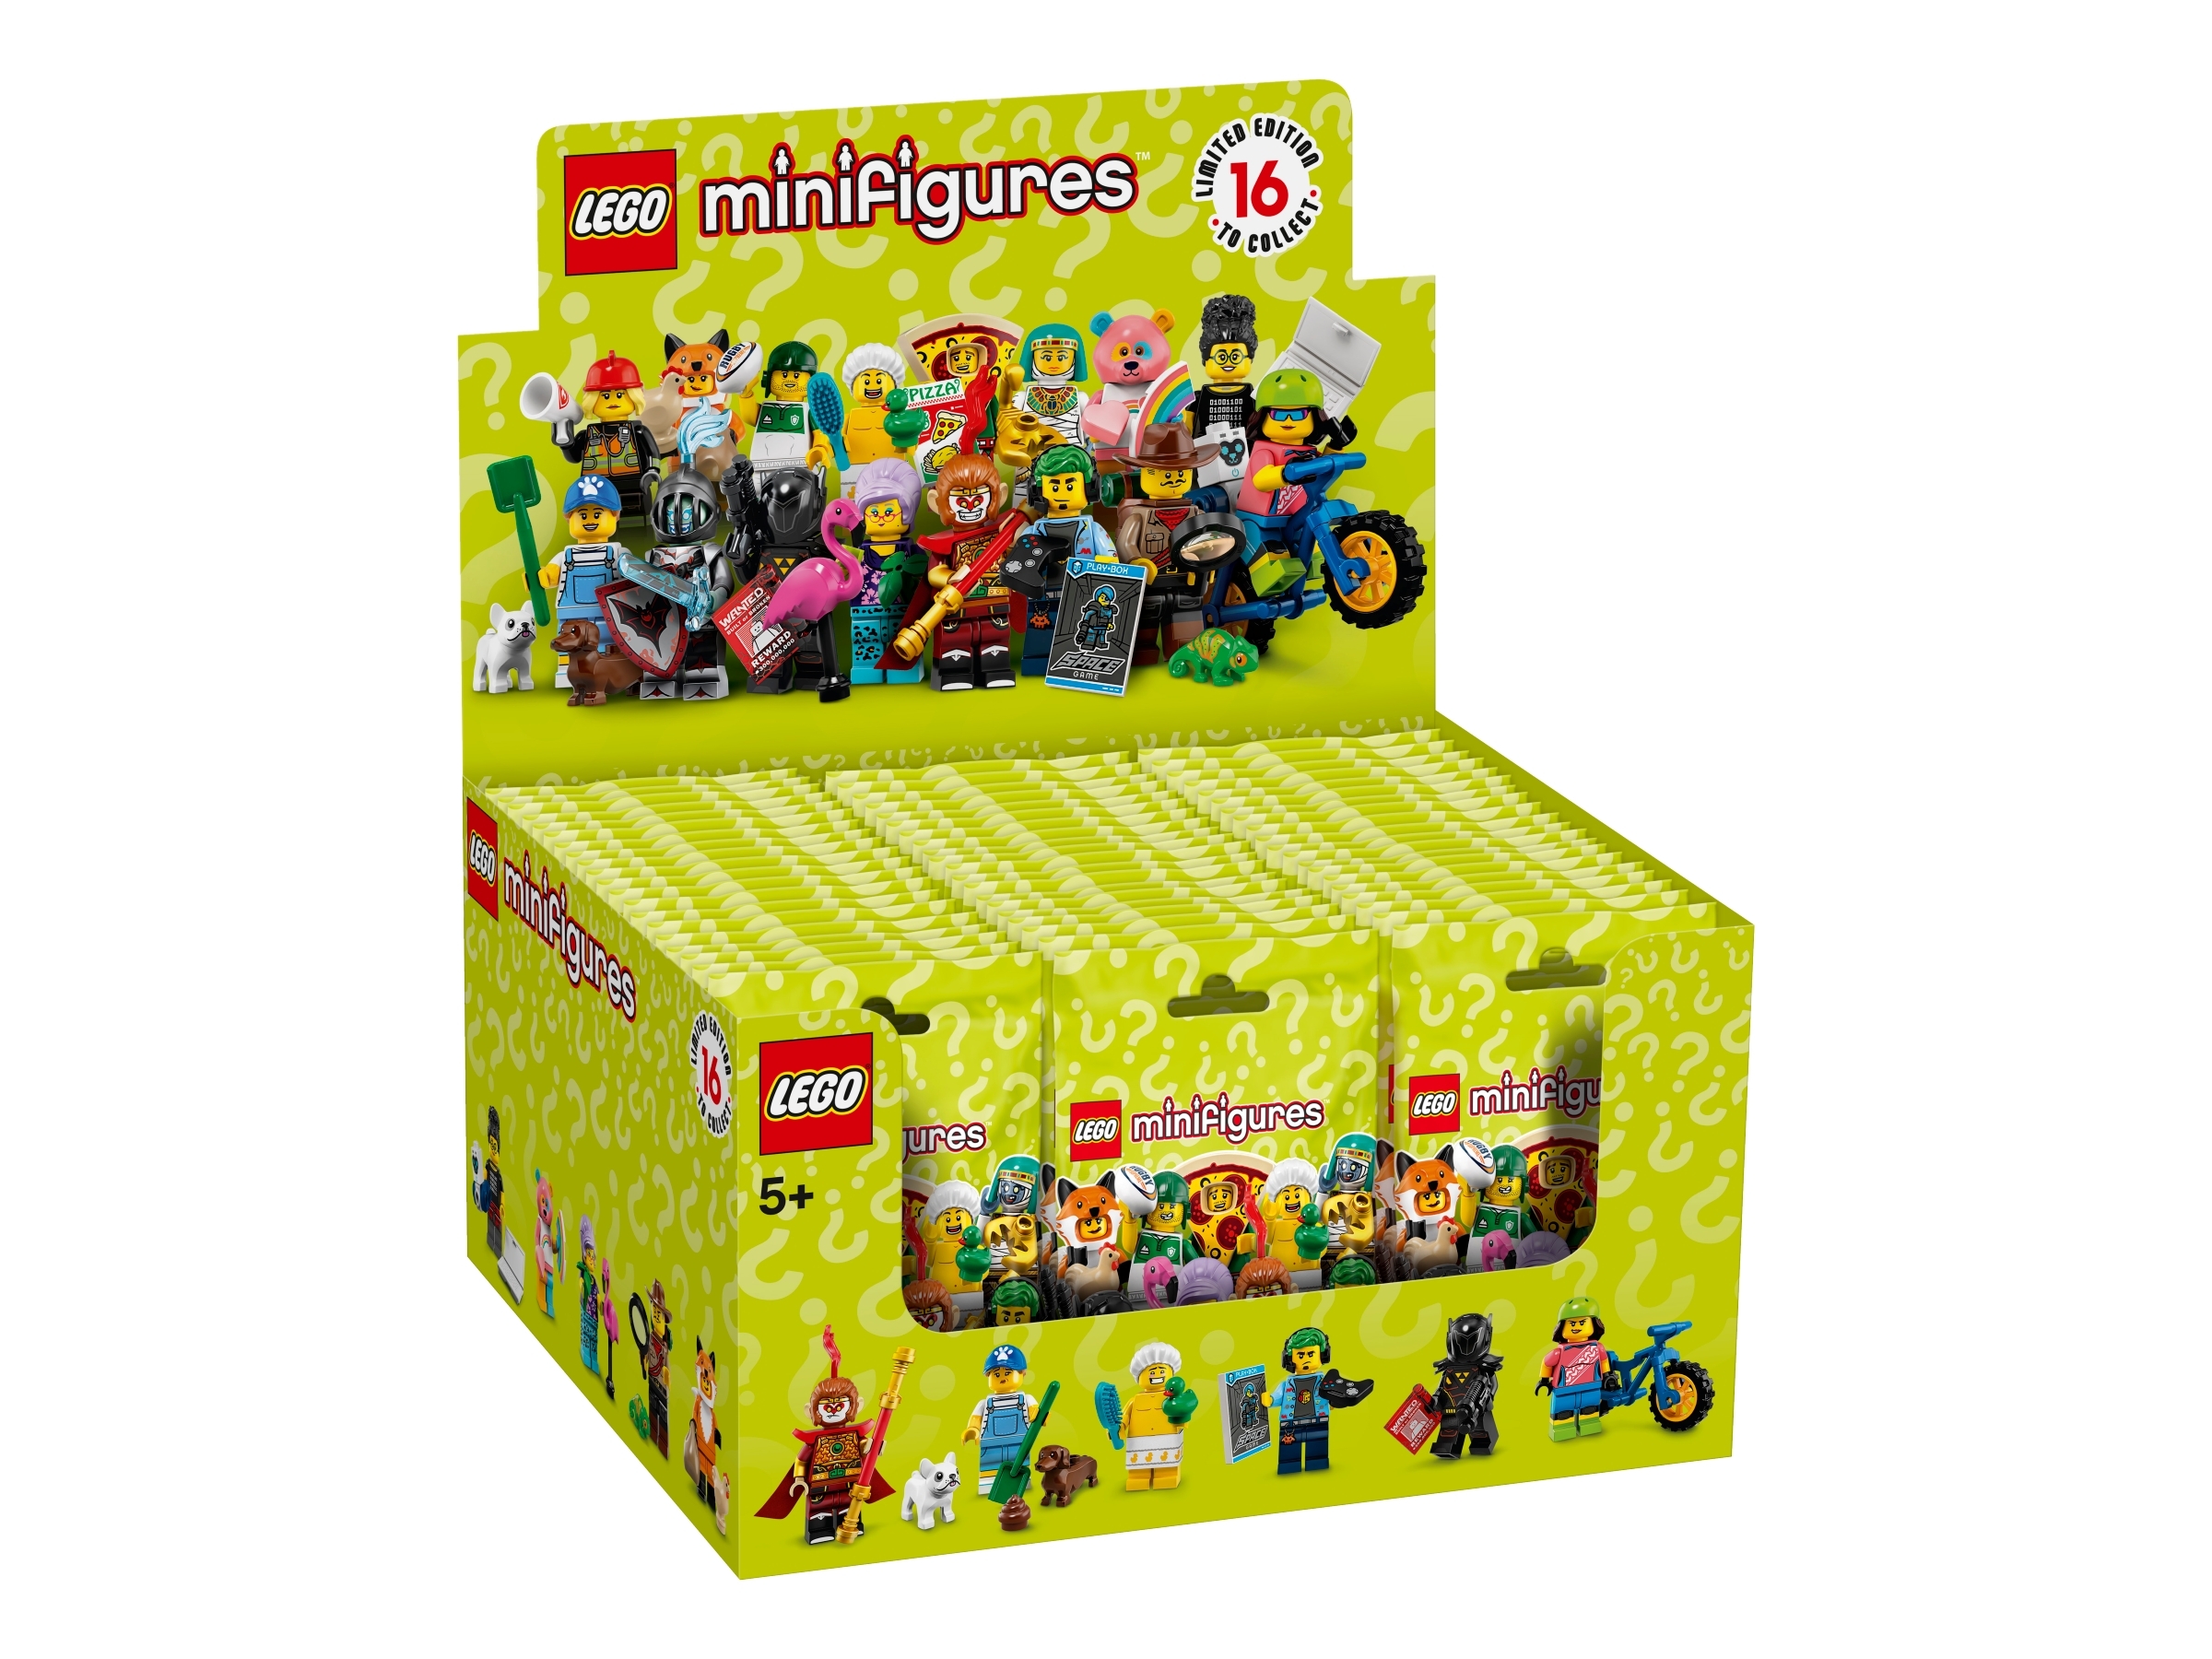 Series 19 box | Minifigures | Buy online at the Official LEGO® Shop US